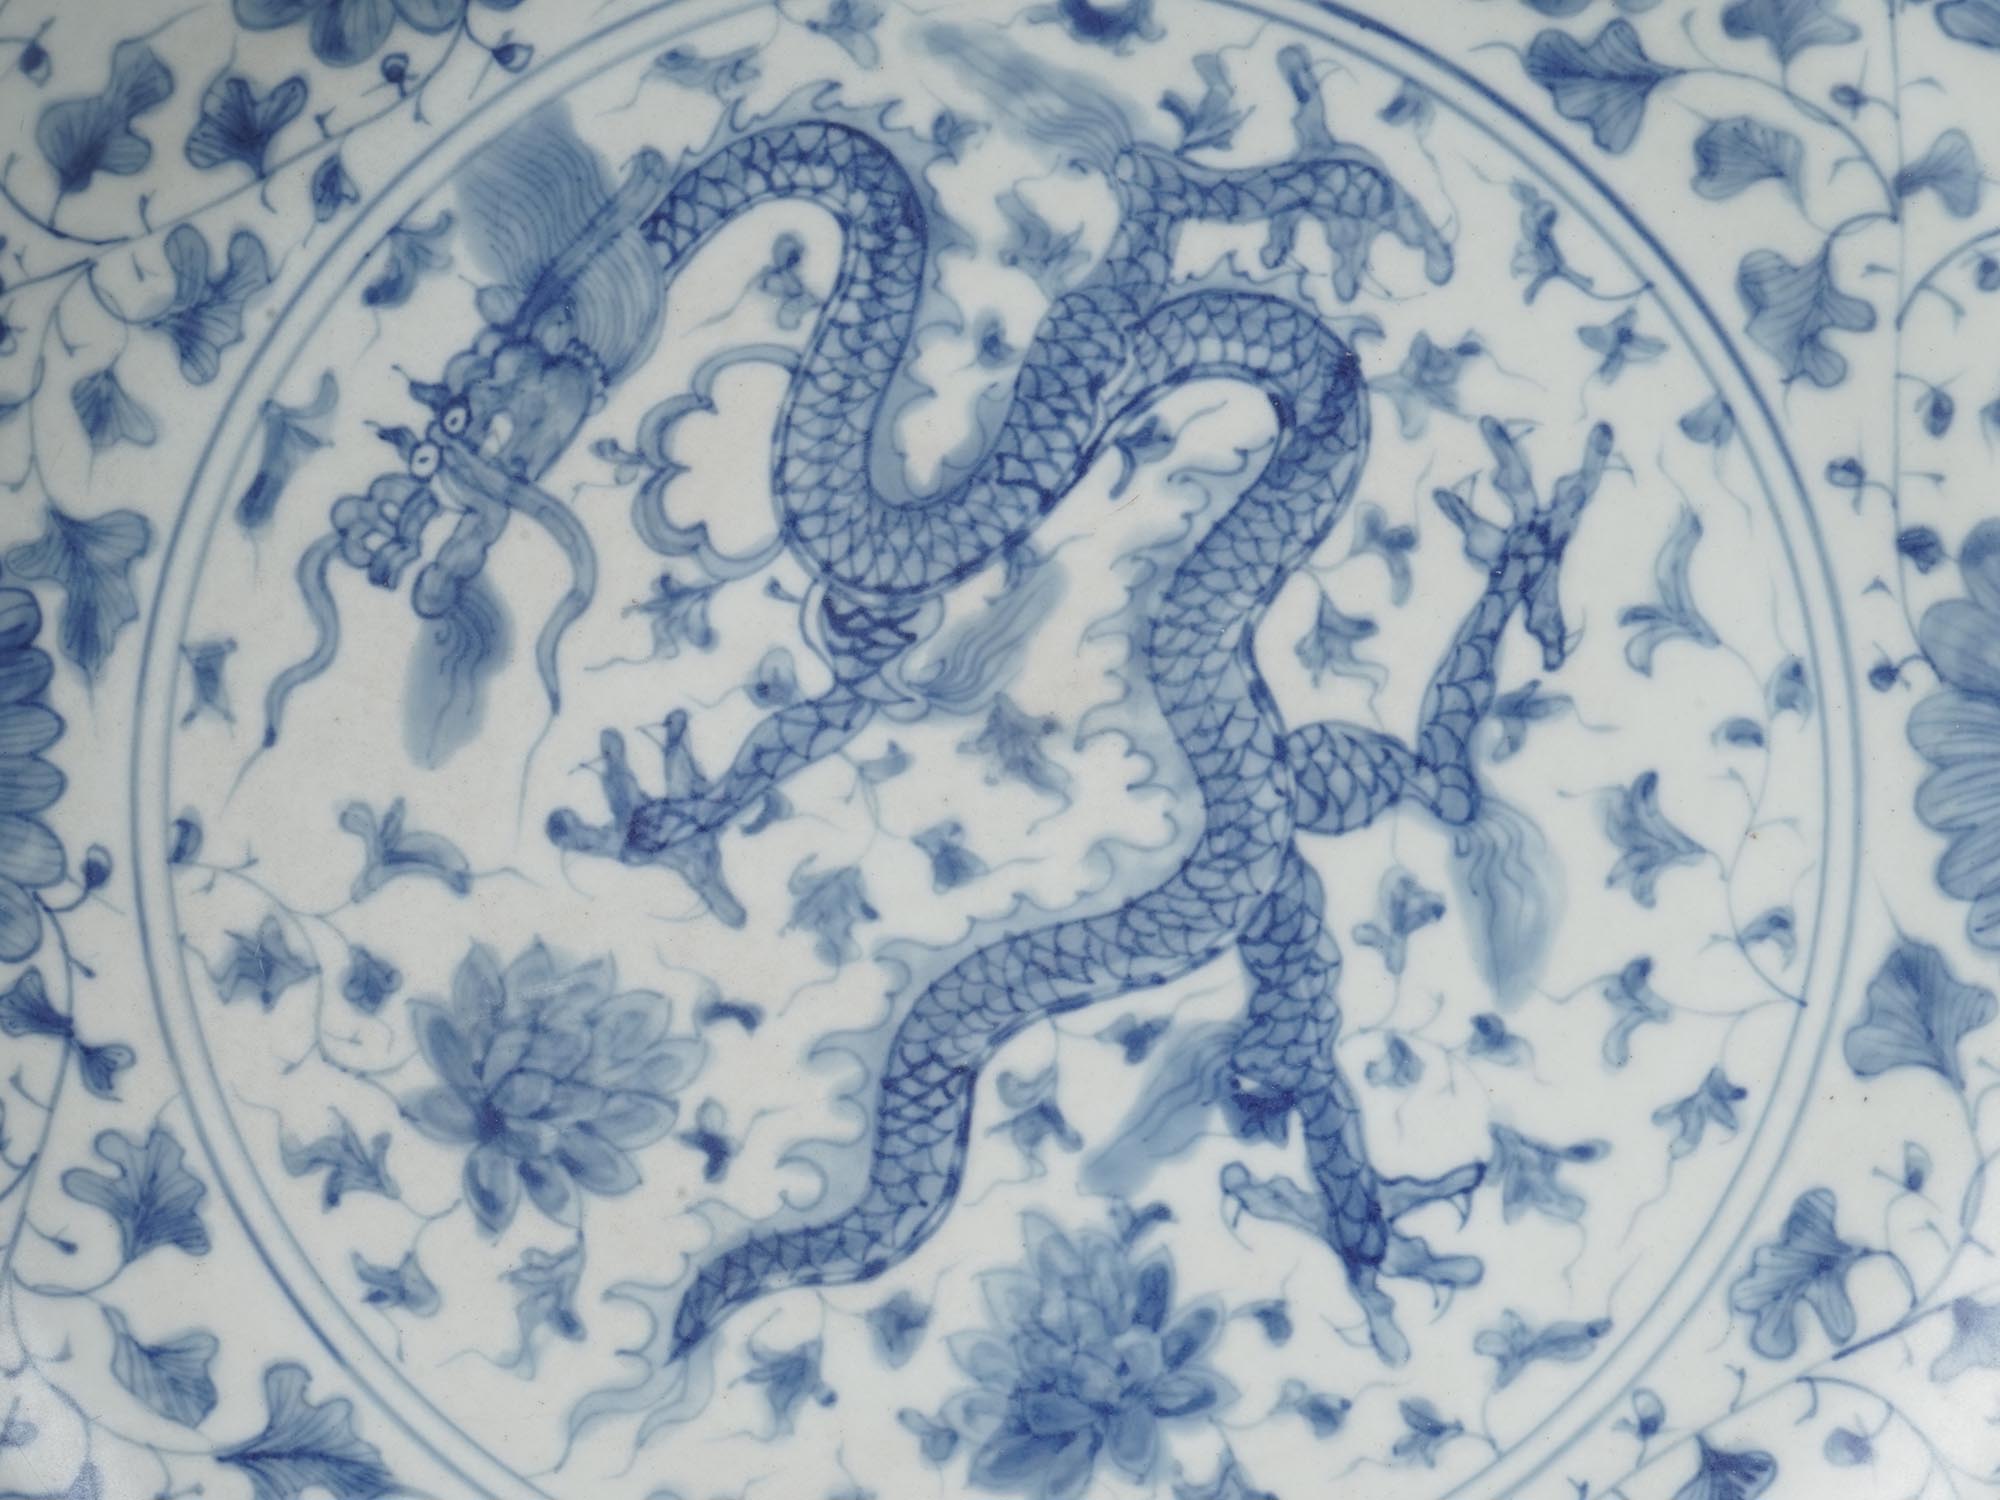 ANTIQUE CHINESE PORCELAIN PLATE WITH DRAGONS PIC-3